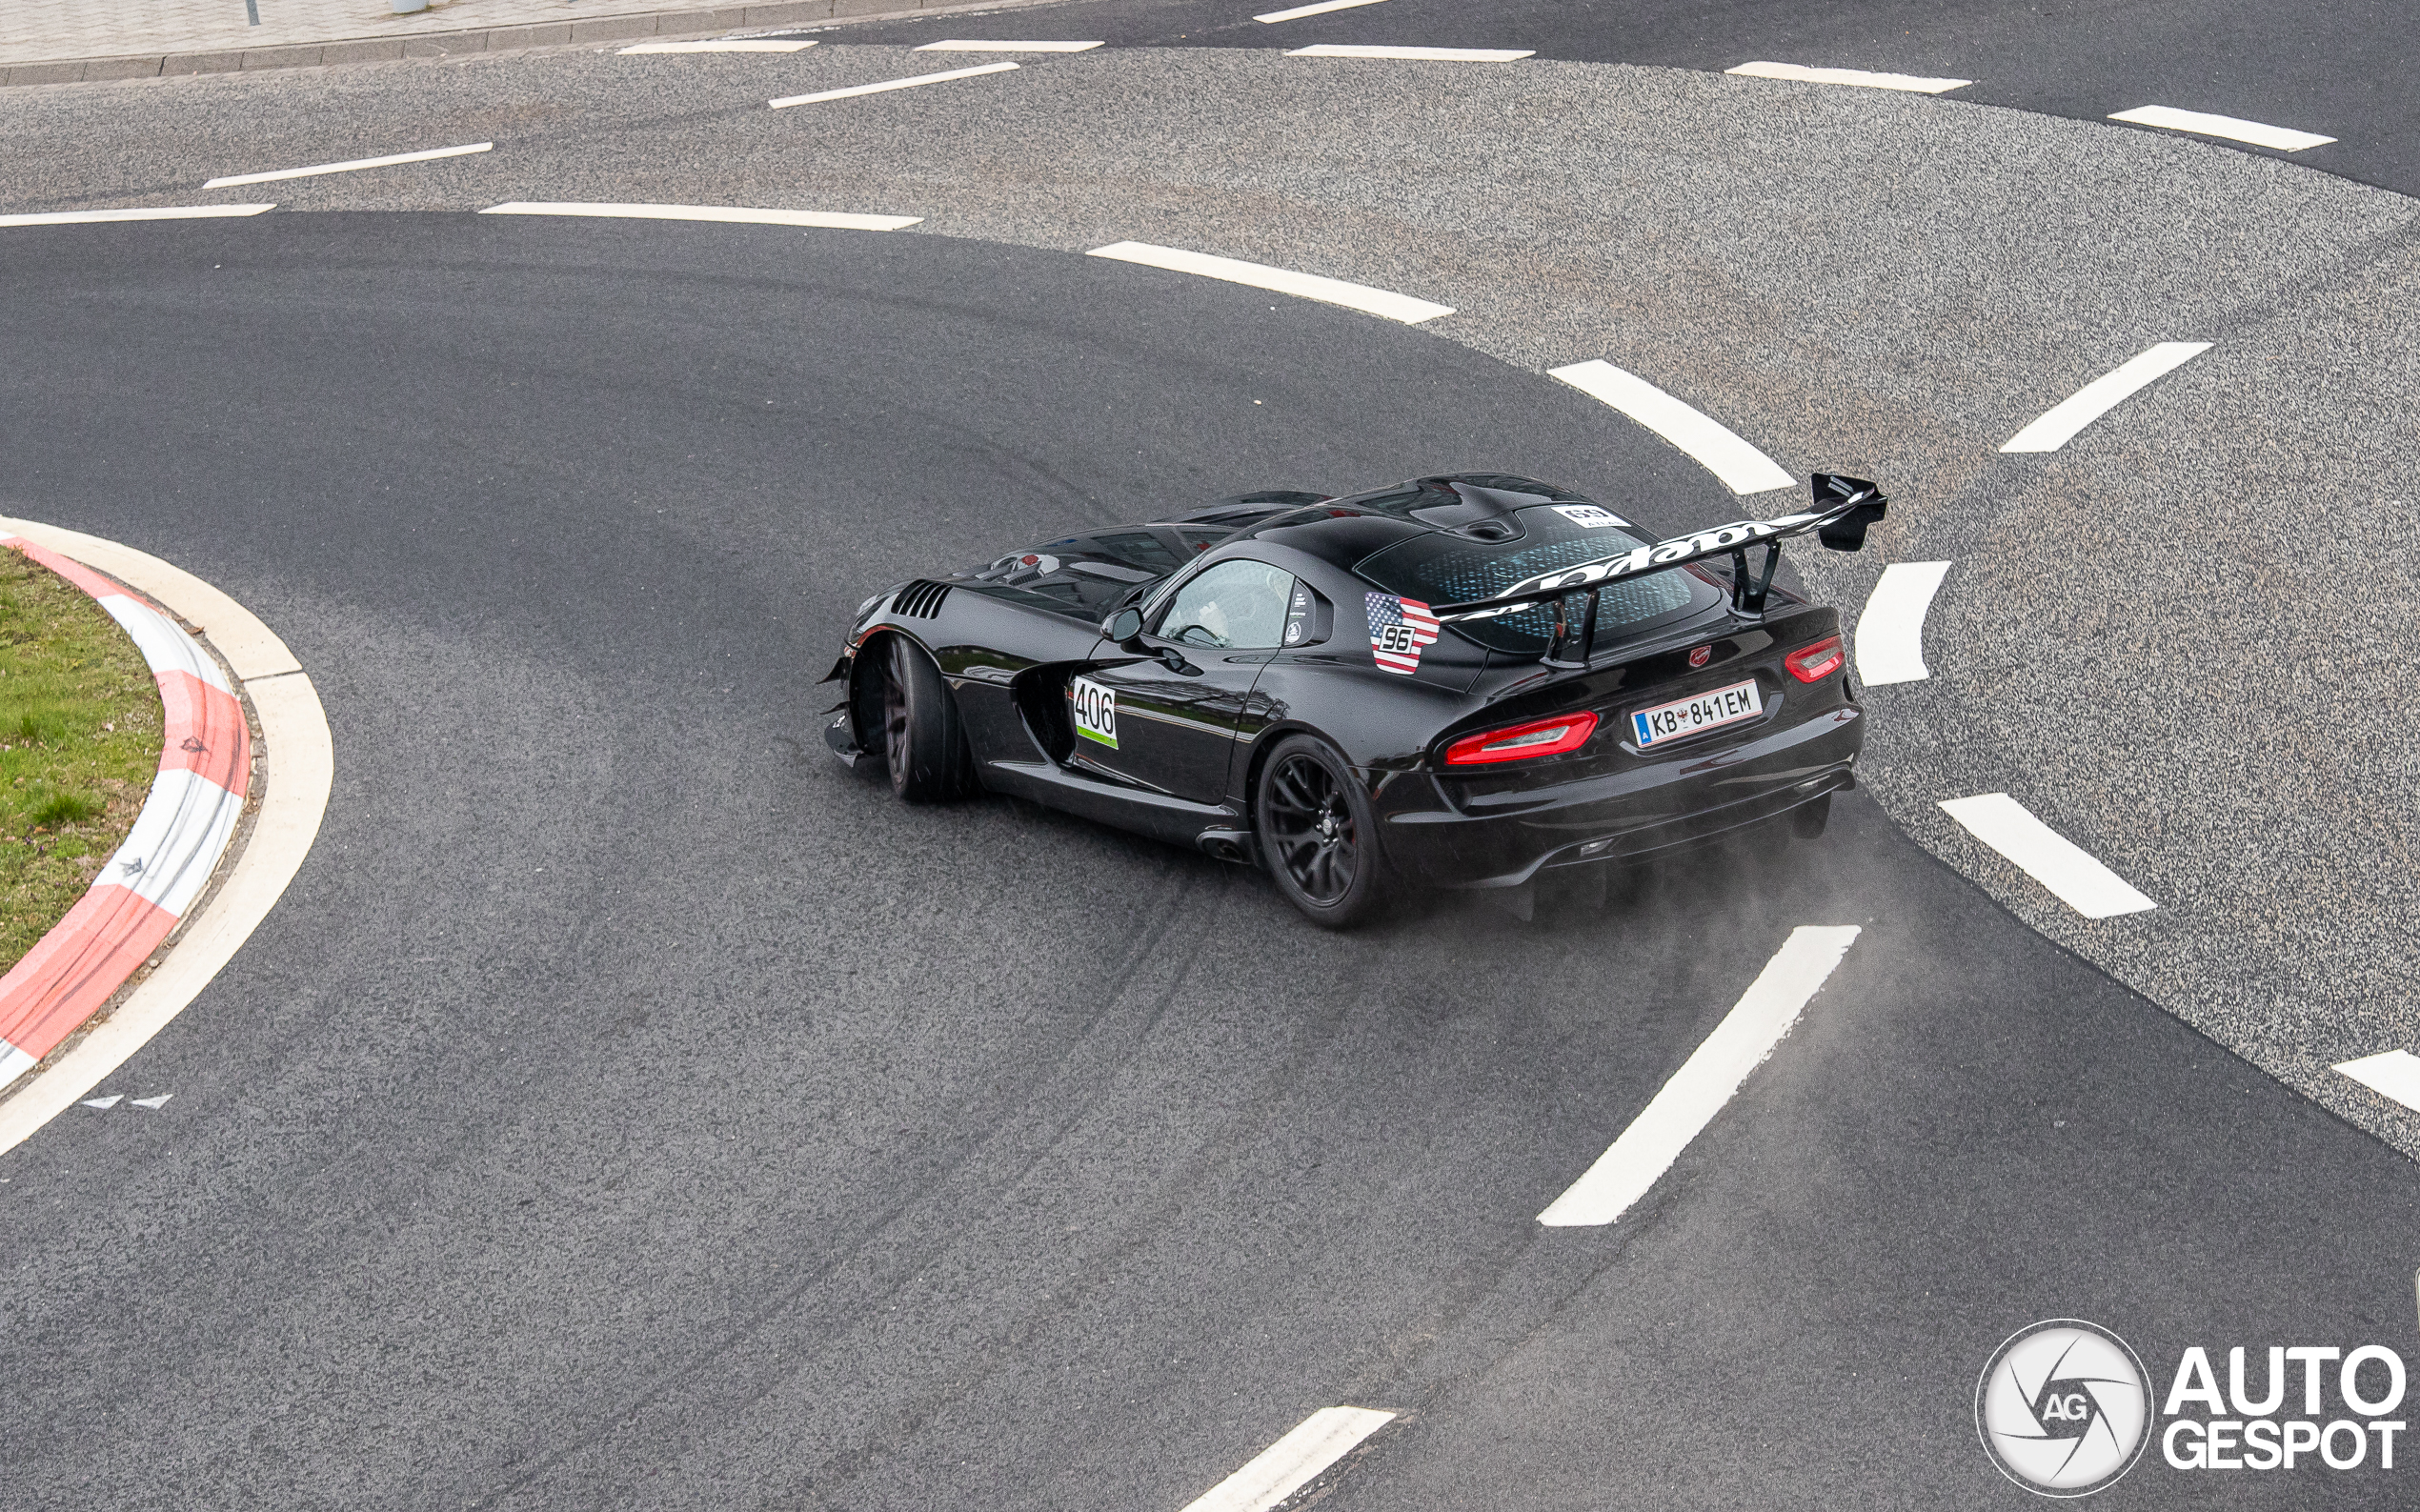 Viper ACR Extreme gedraagt zich extreem